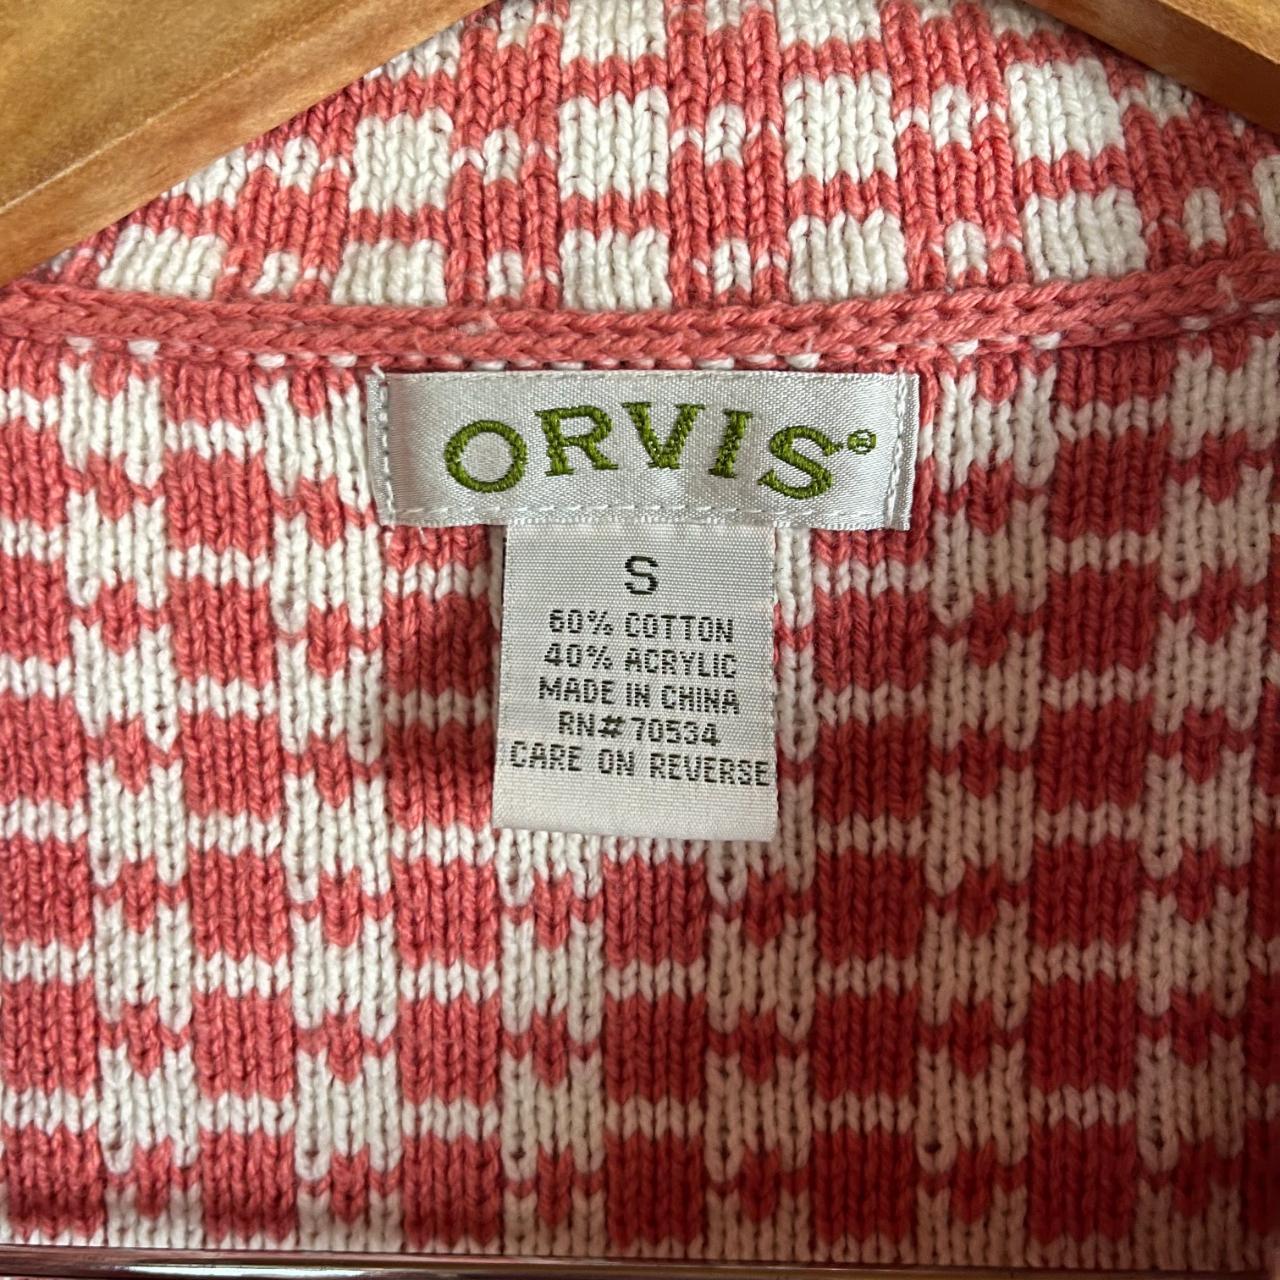 Orvis Women's White and Red Cardigan | Depop